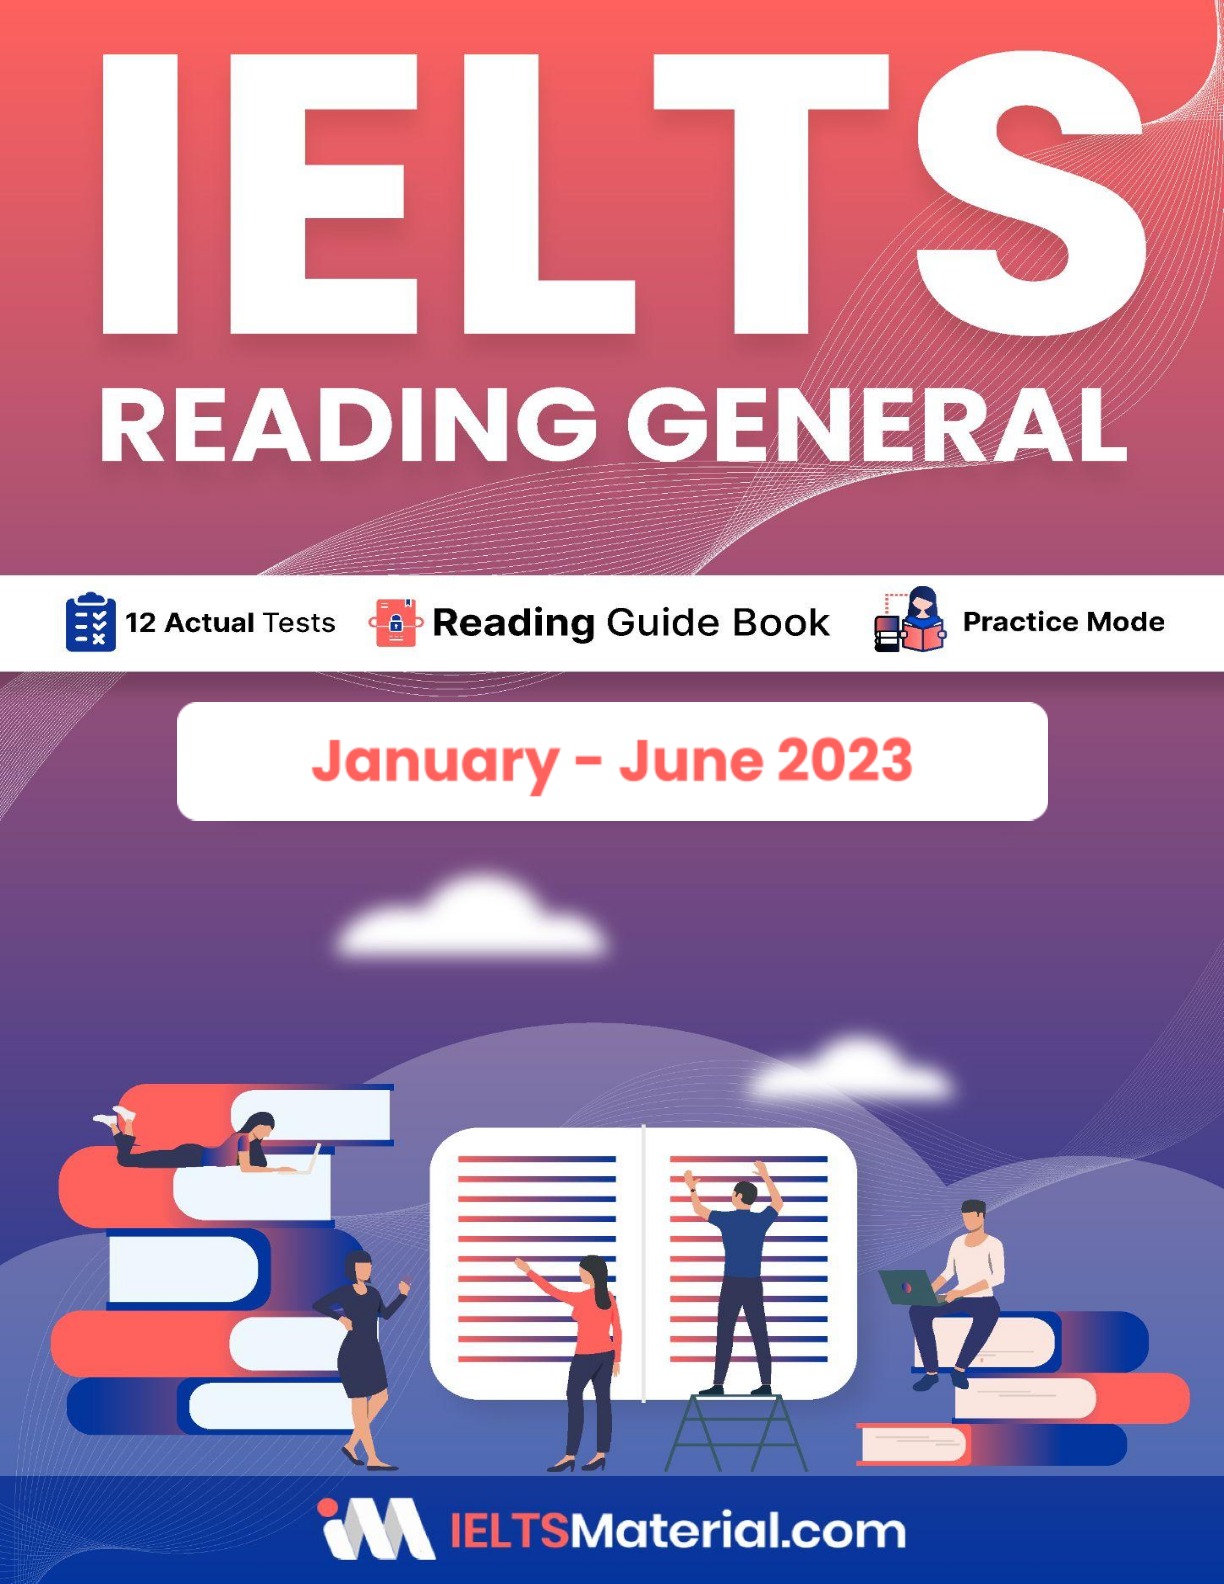 The Ultimate Guide to IELTS General Reading: Tips, Tricks, and Practice (Mock) Tests (January – June 2023)